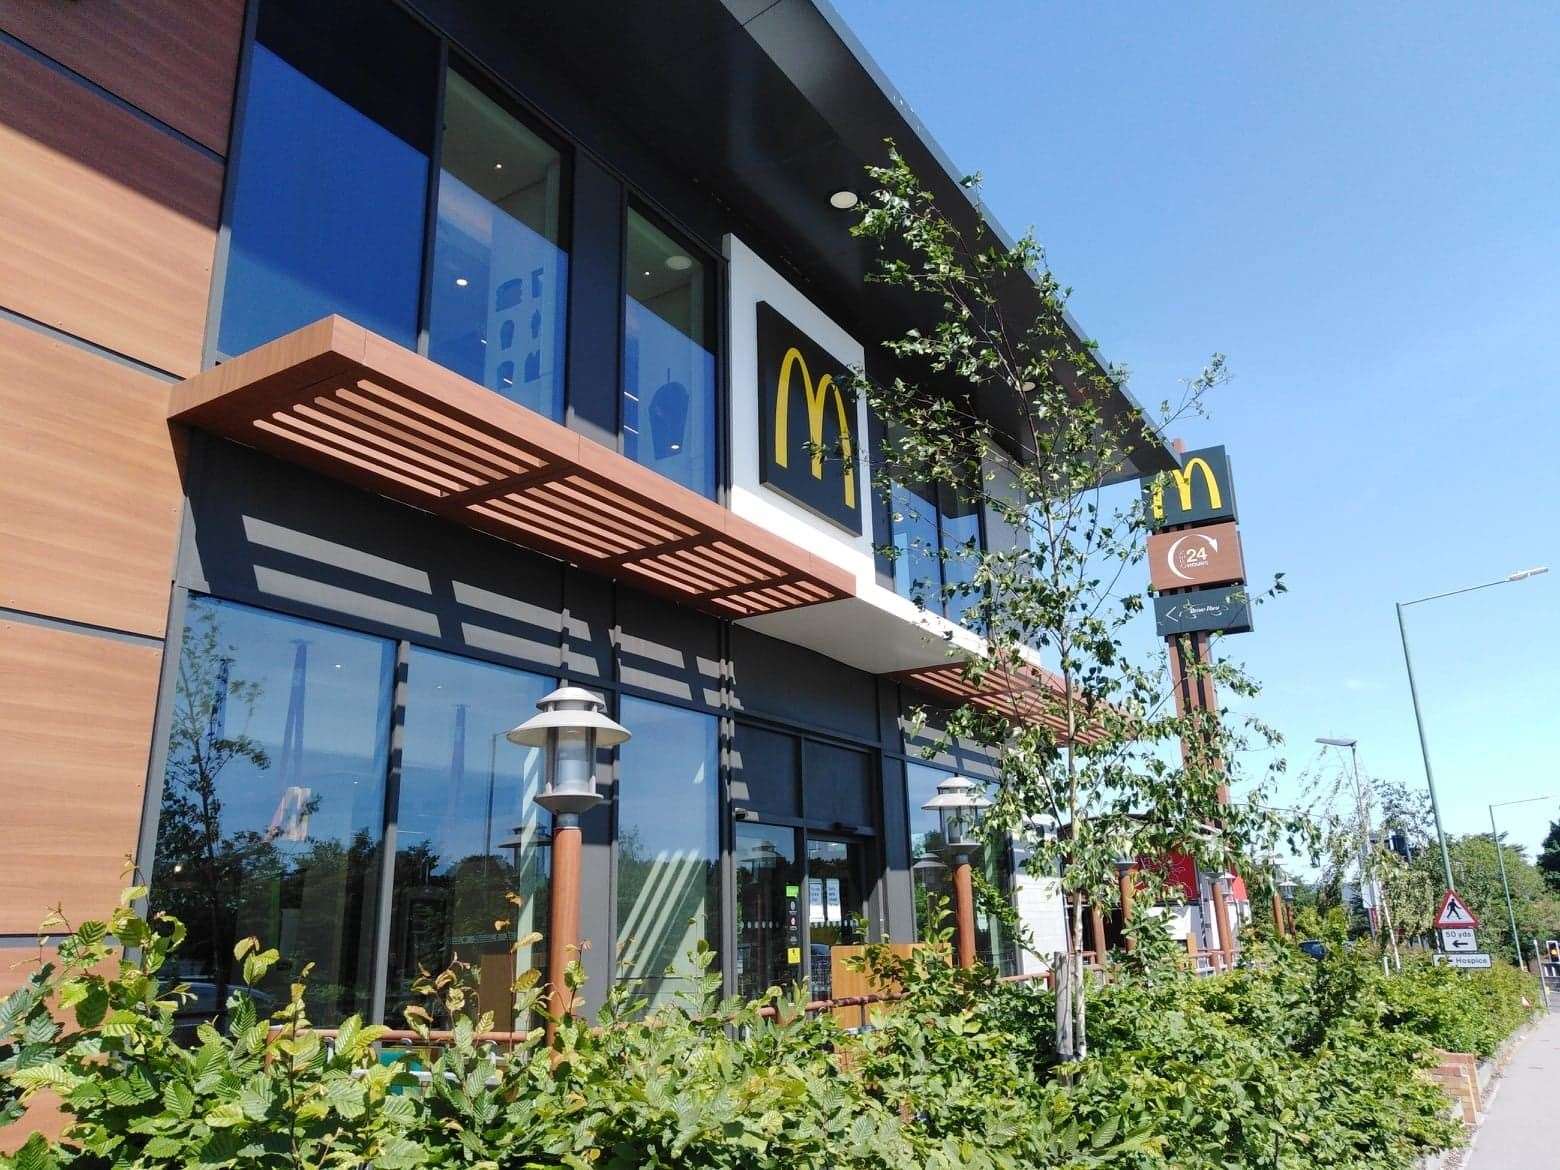 Mcdonald's in Aylesford is opening tomorrow morning